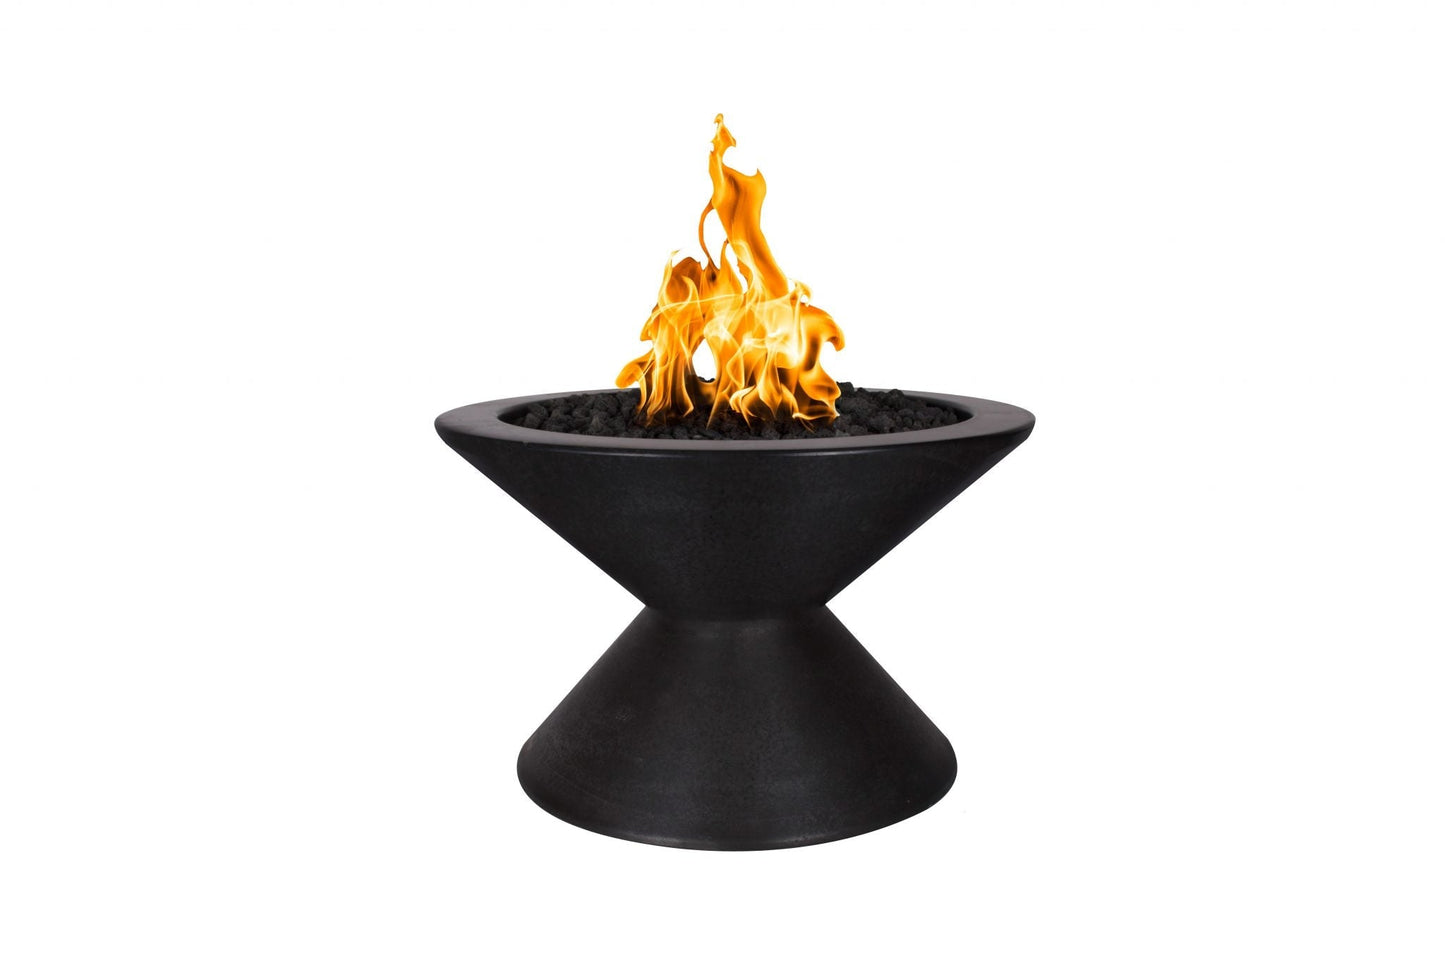 The Outdoor Plus Round Lucia 31" Metallic Silver GFRC Concrete Liquid Propane Fire Pit with 110V Electronic Ignition